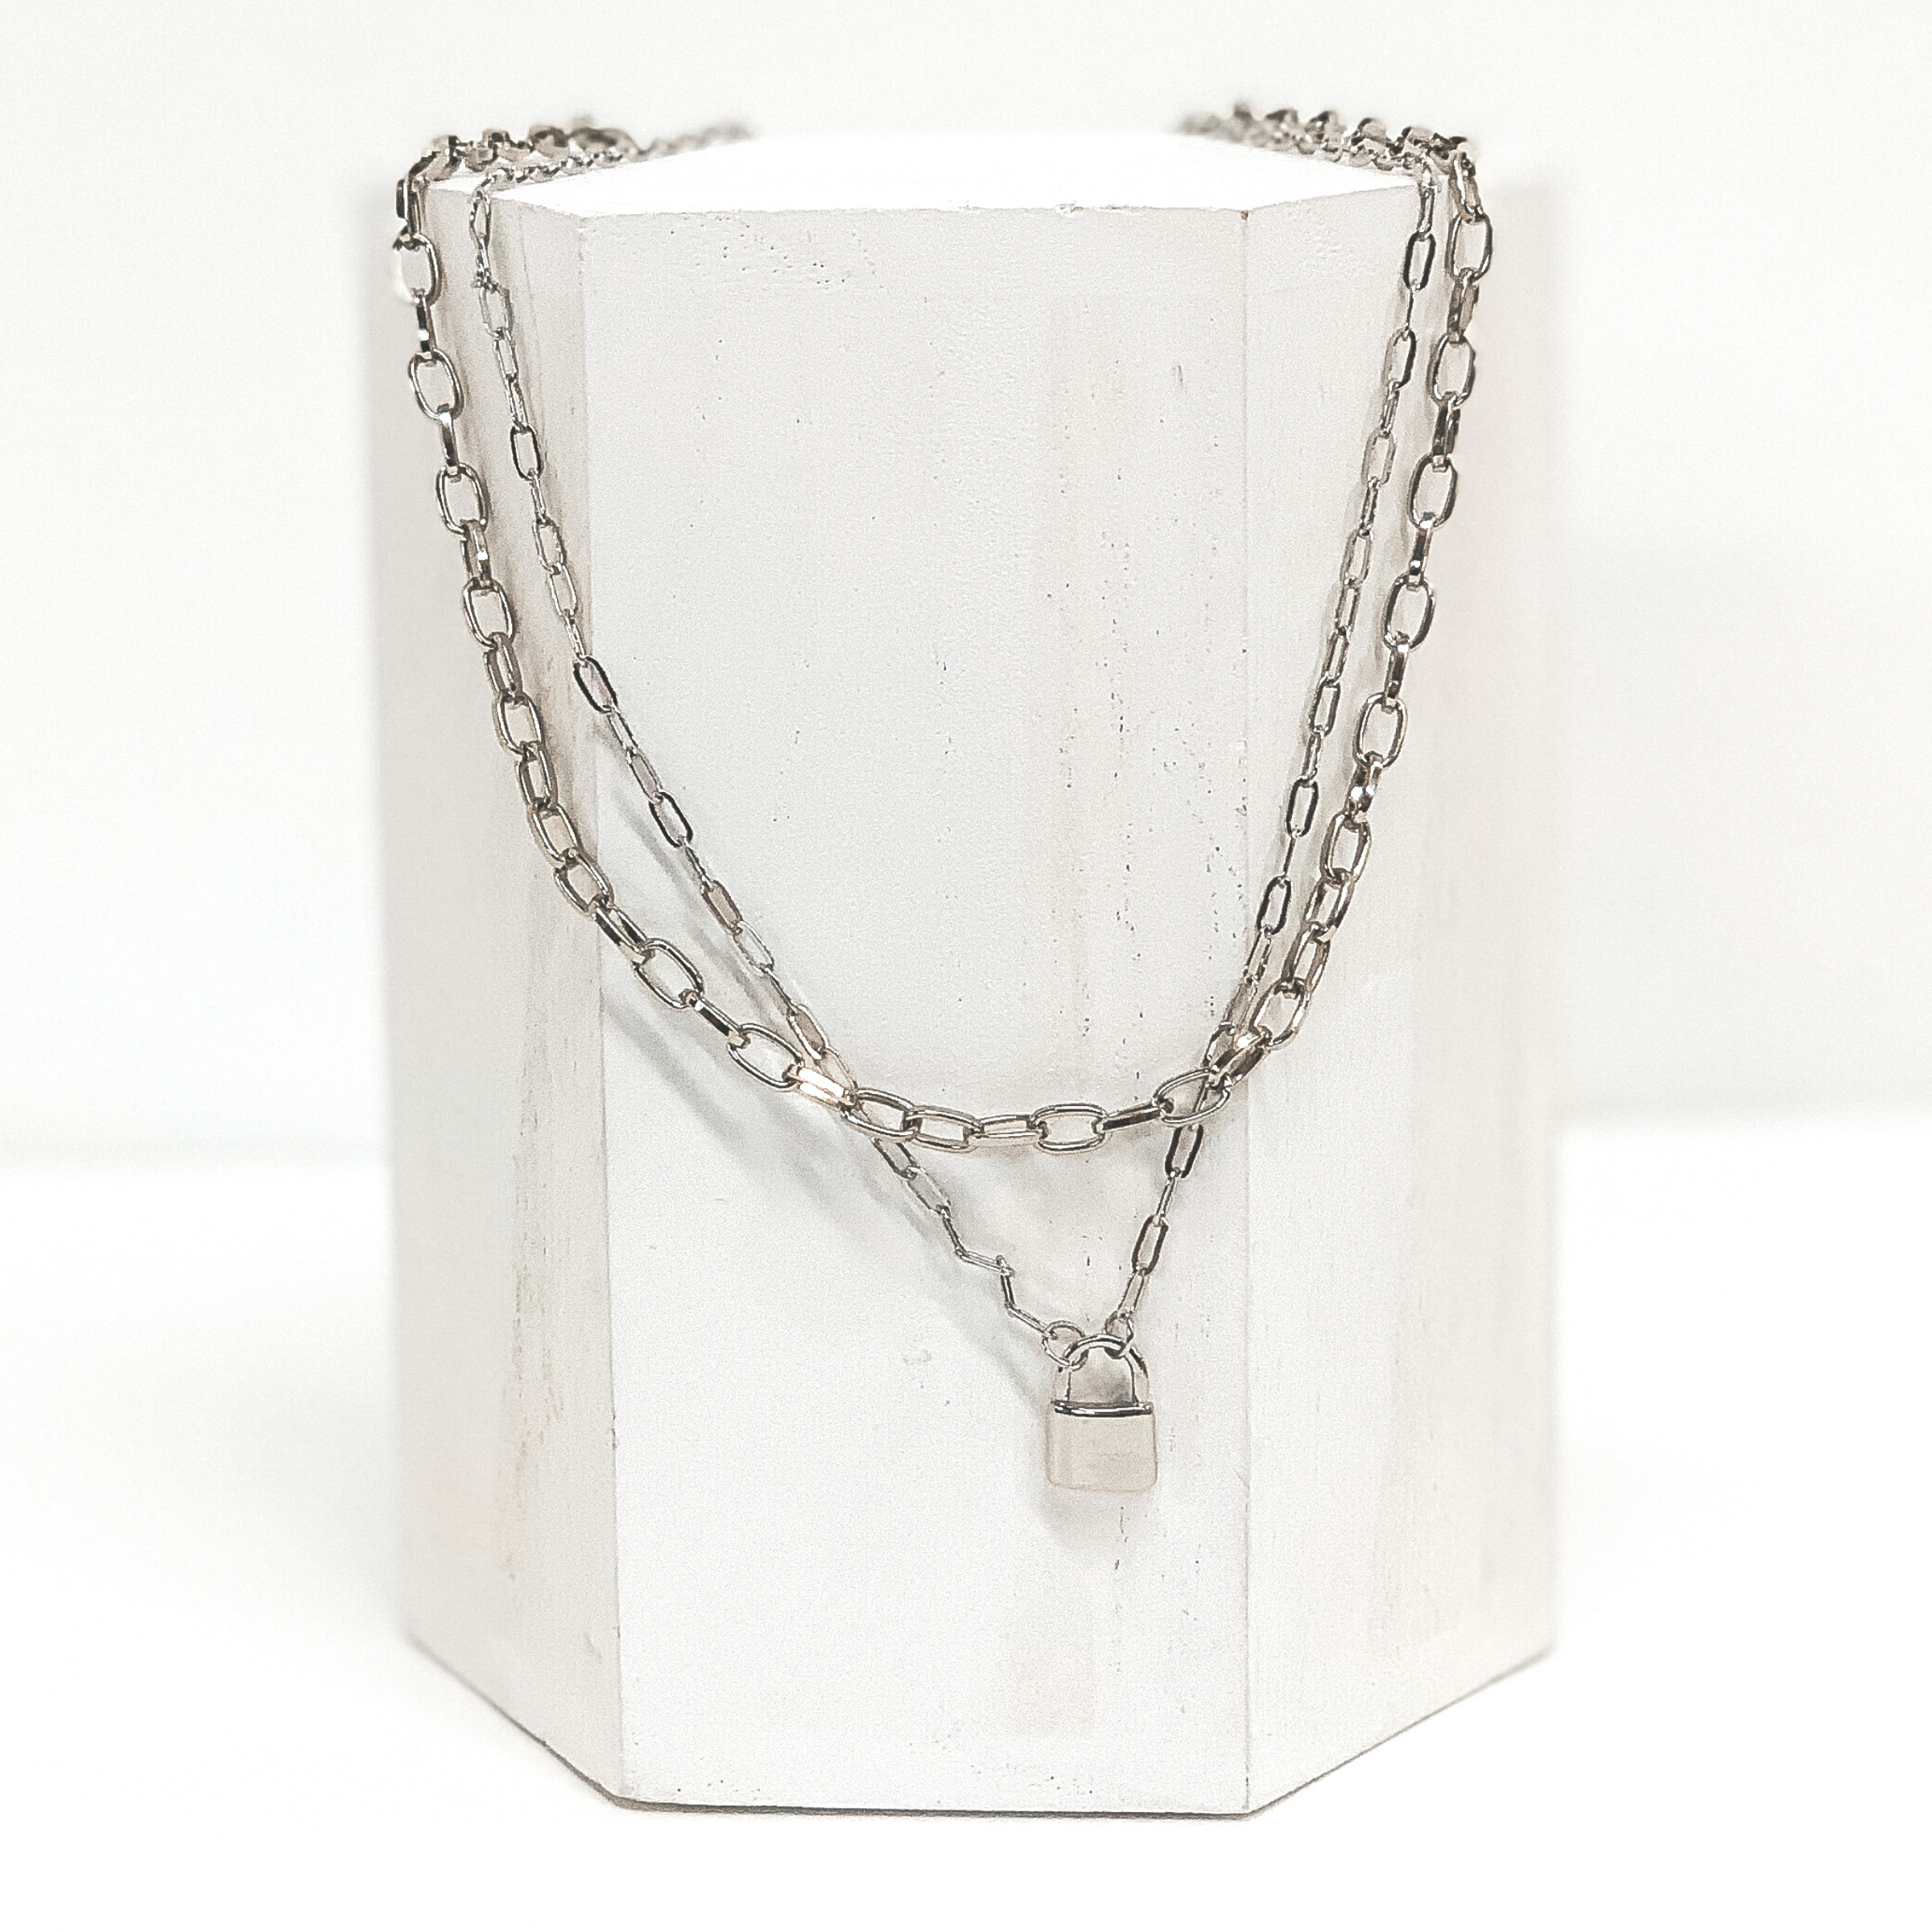 Two Strand Chain Link Necklace with Lock Charm in Silver - Giddy Up Glamour Boutique